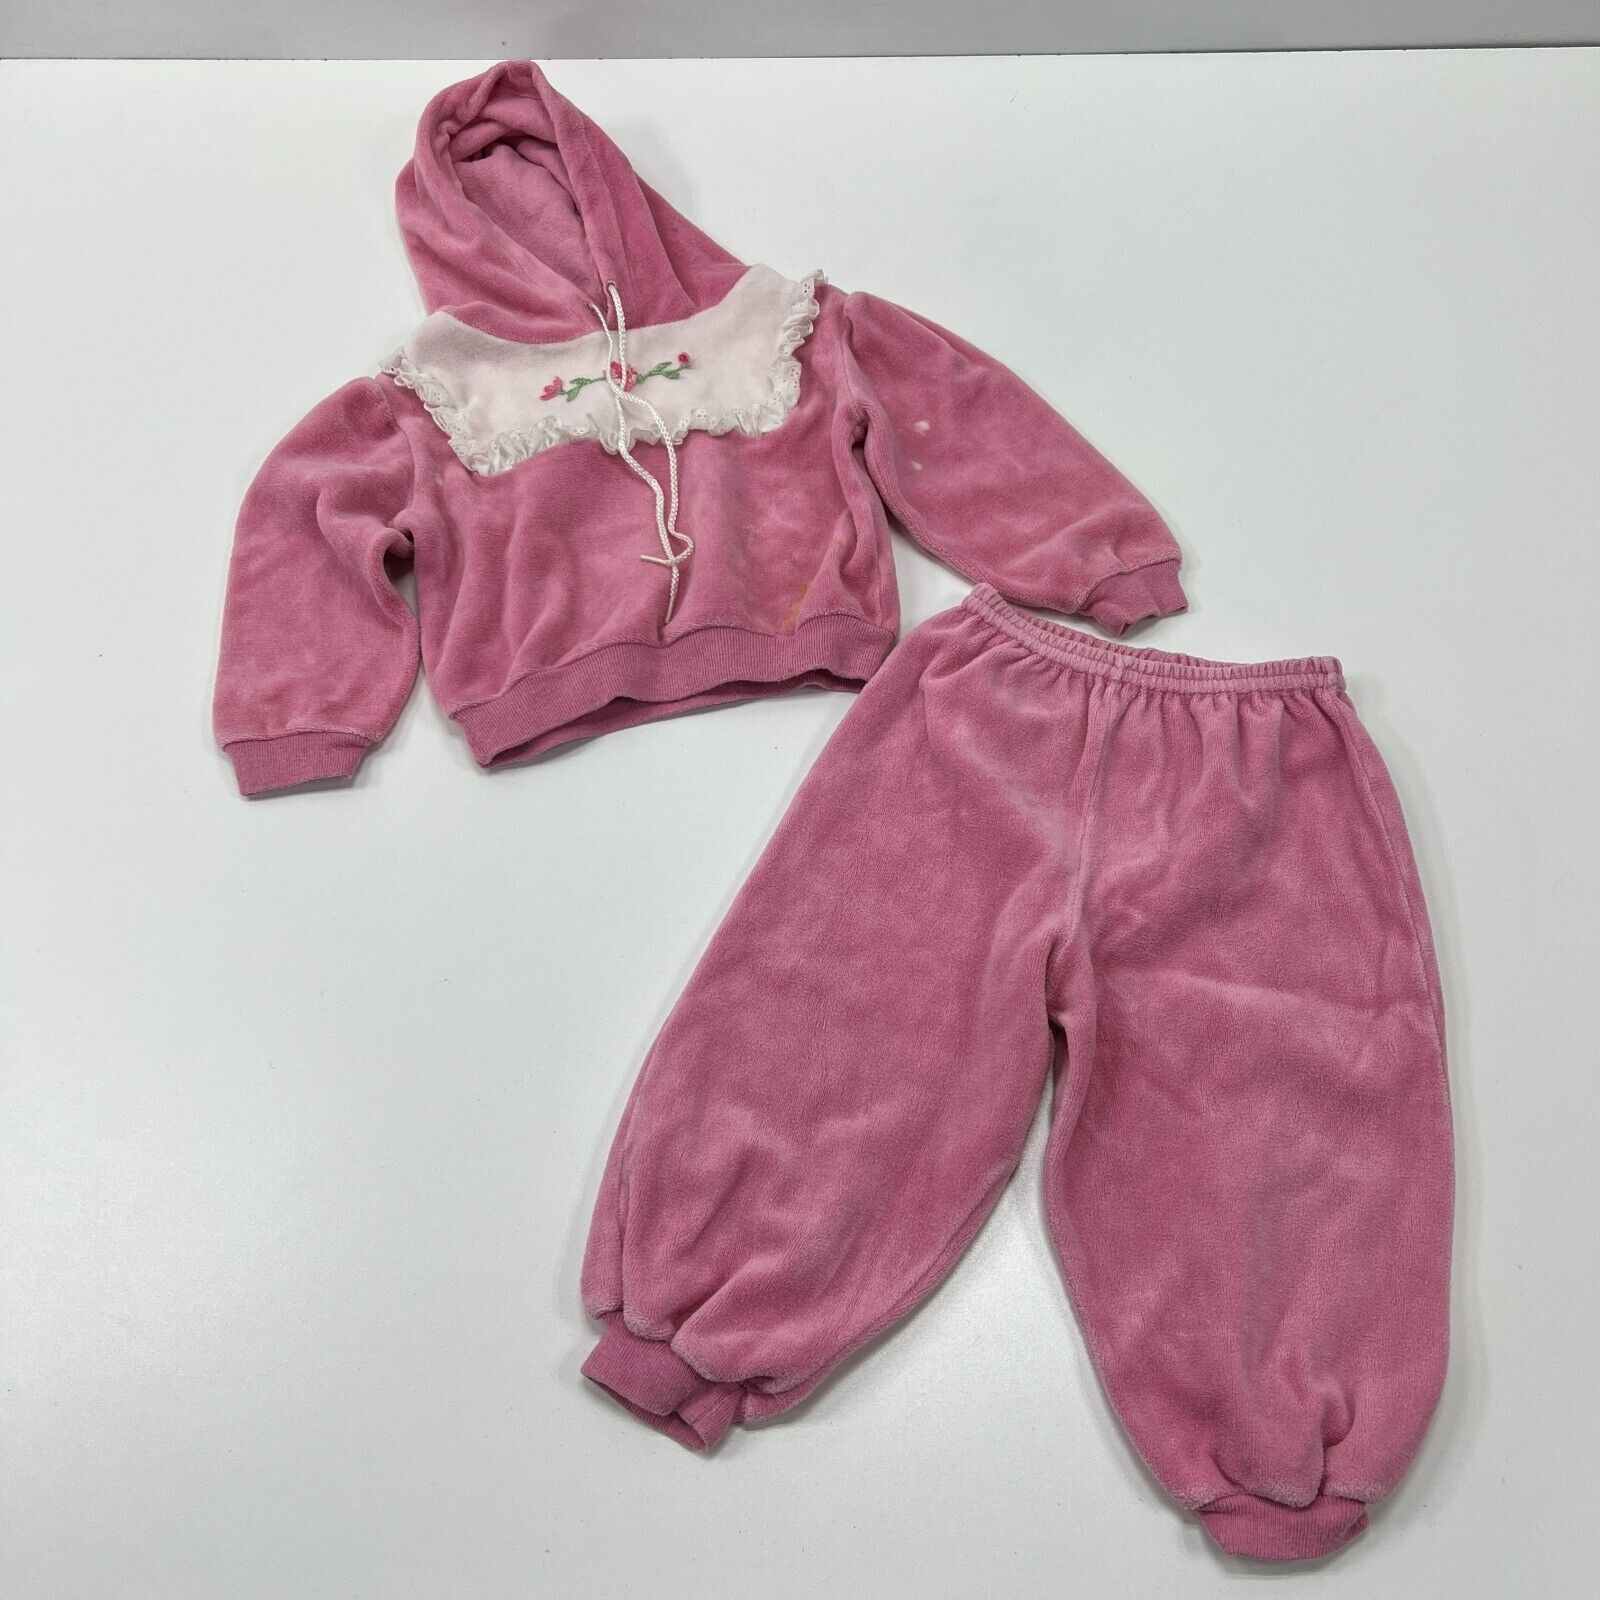 JC Penney Toddle Time Pink Velour Hooded Track Suit Size 2 Vintage 1980s